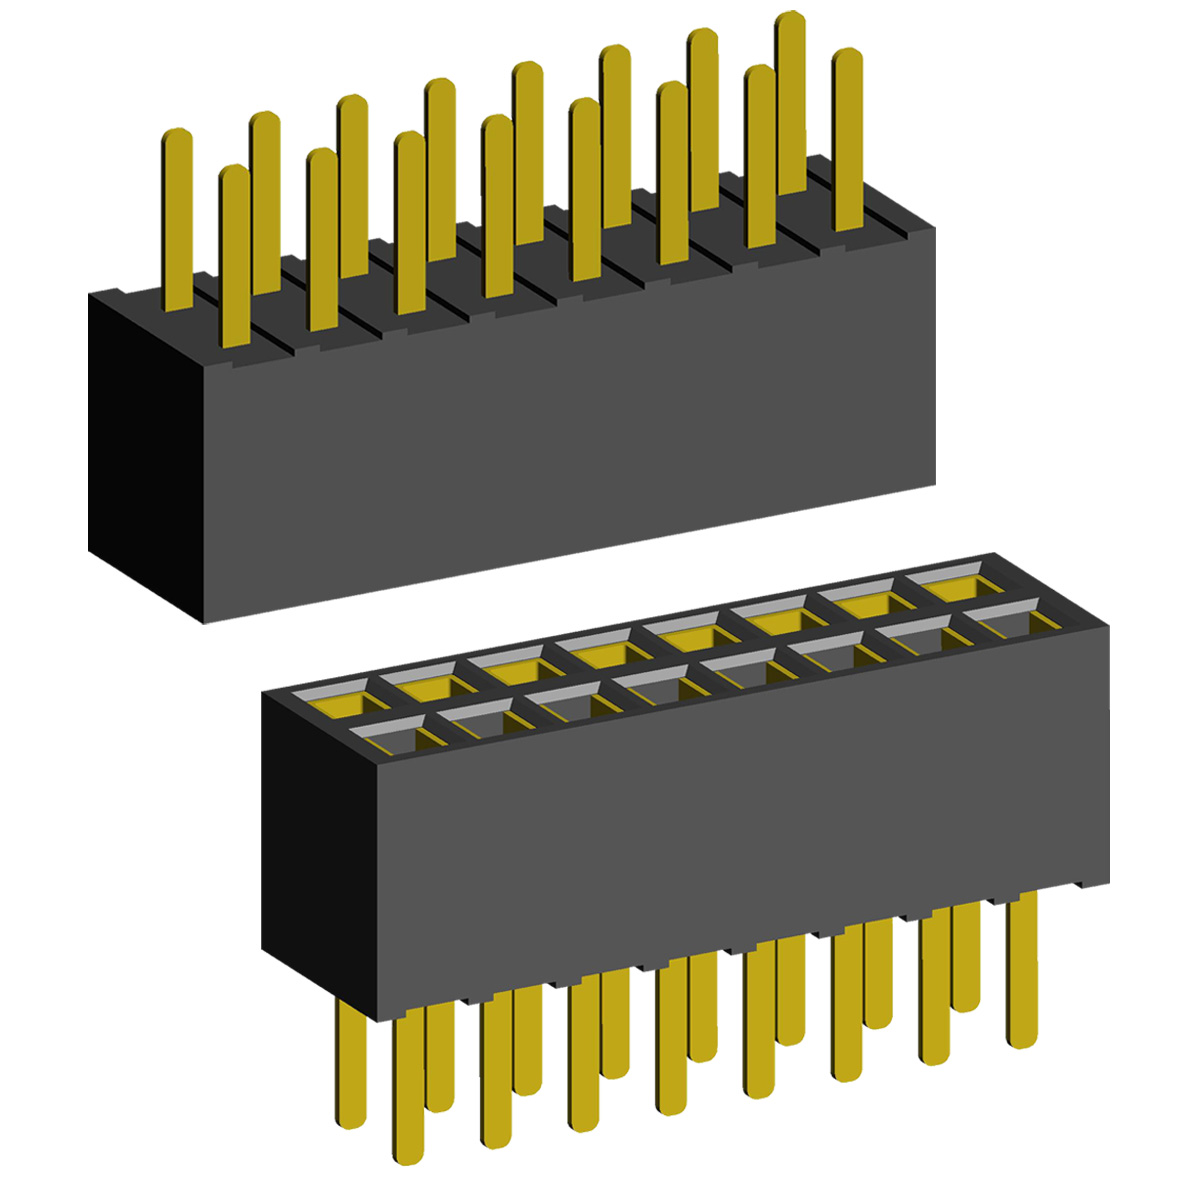 Open pin headers and Sockets for its, PCB/PCB (Board-to-Board) types with pitch 1,27x1,27 Pitch between pins in one row and sockets for them